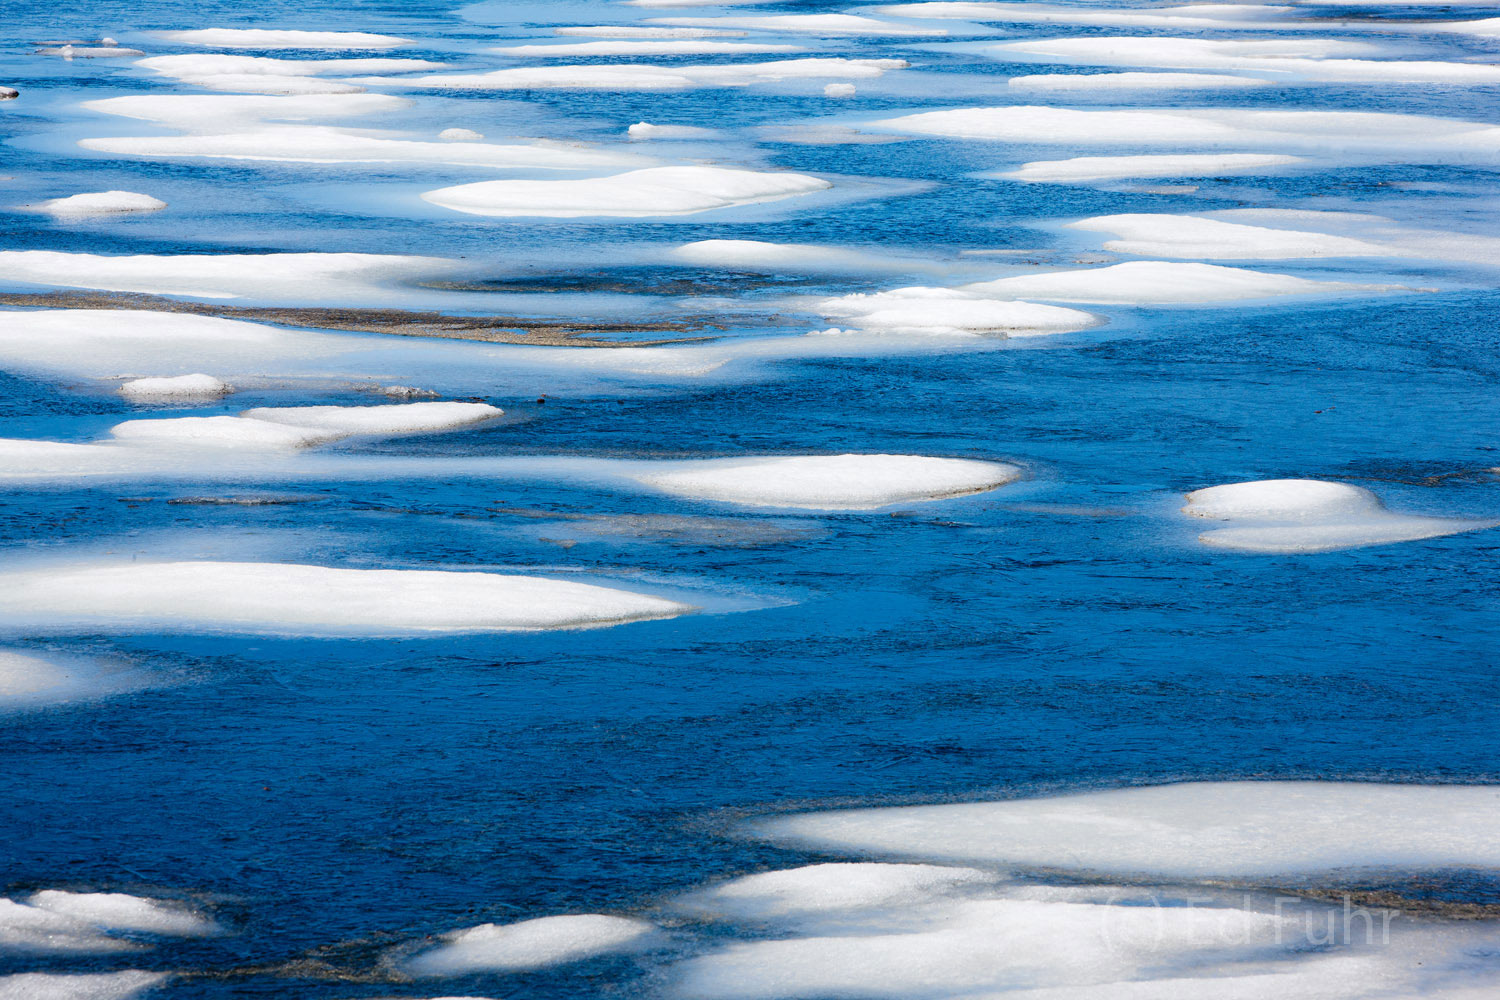 The ice that has gripped Tenaya Lake melts at last into thousands of ice floes in early June.